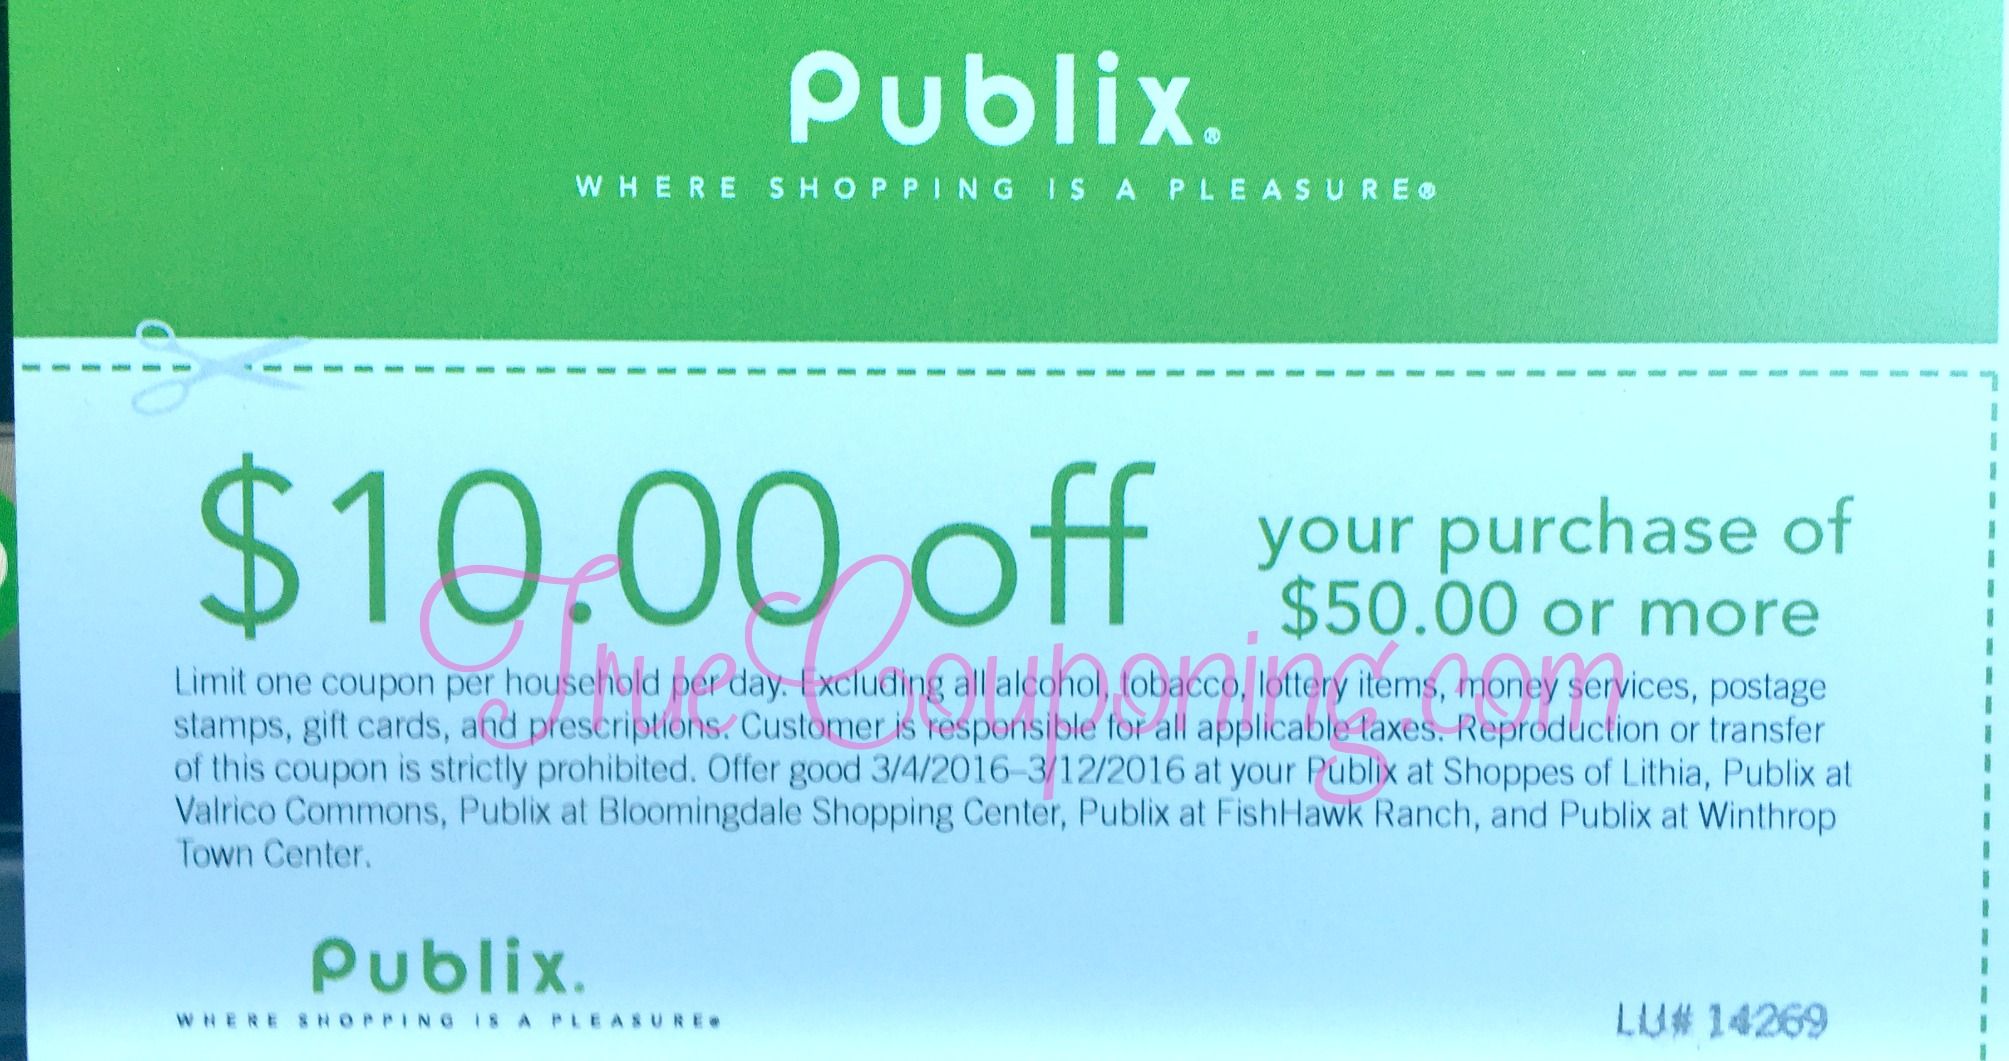 Publix Coupon $10 Off $50 in My Mailbox Today! (Select Publix STORES Listed!)